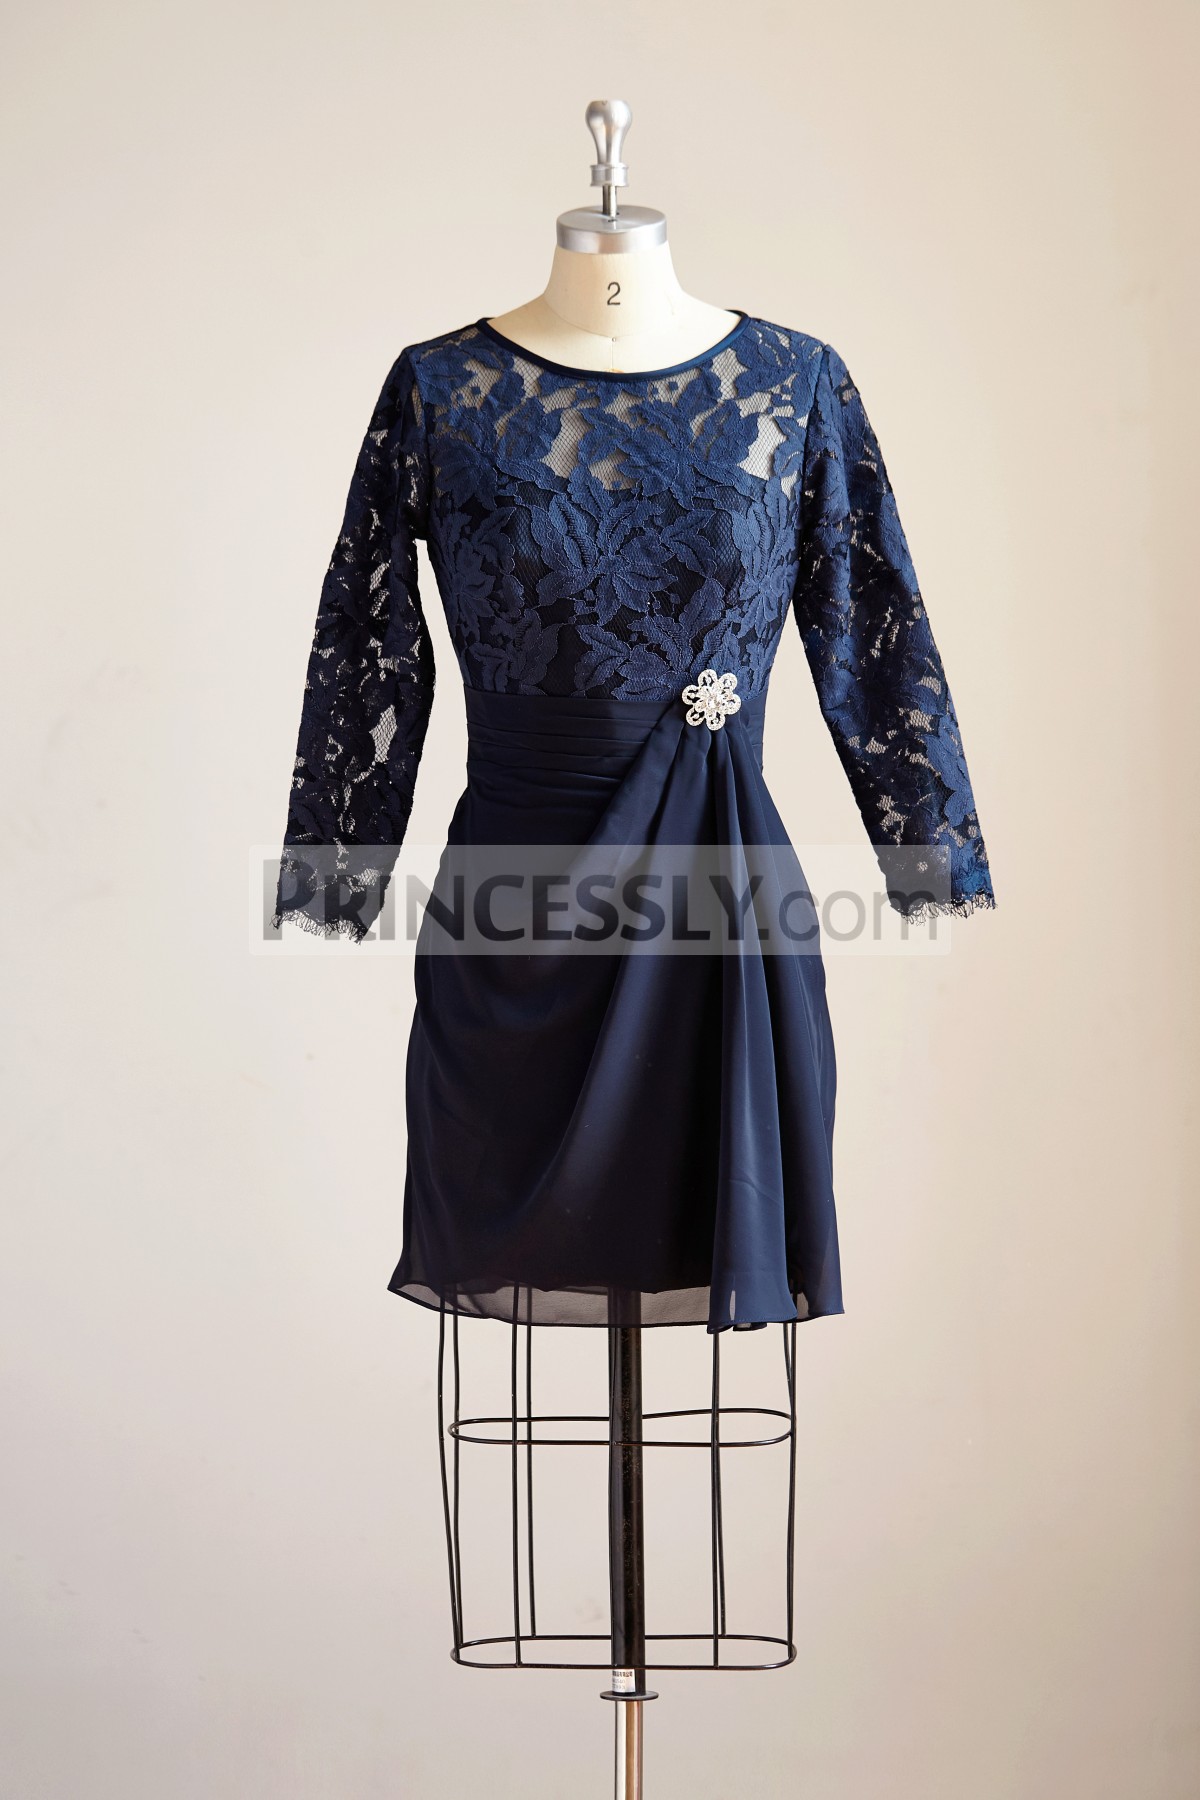 Princessly.com-K1000290-Long Sleeves Navy Blue Chiffon Lace Short Knee Length Mother Dress/Wedding Party Mother of Bride Dress-31